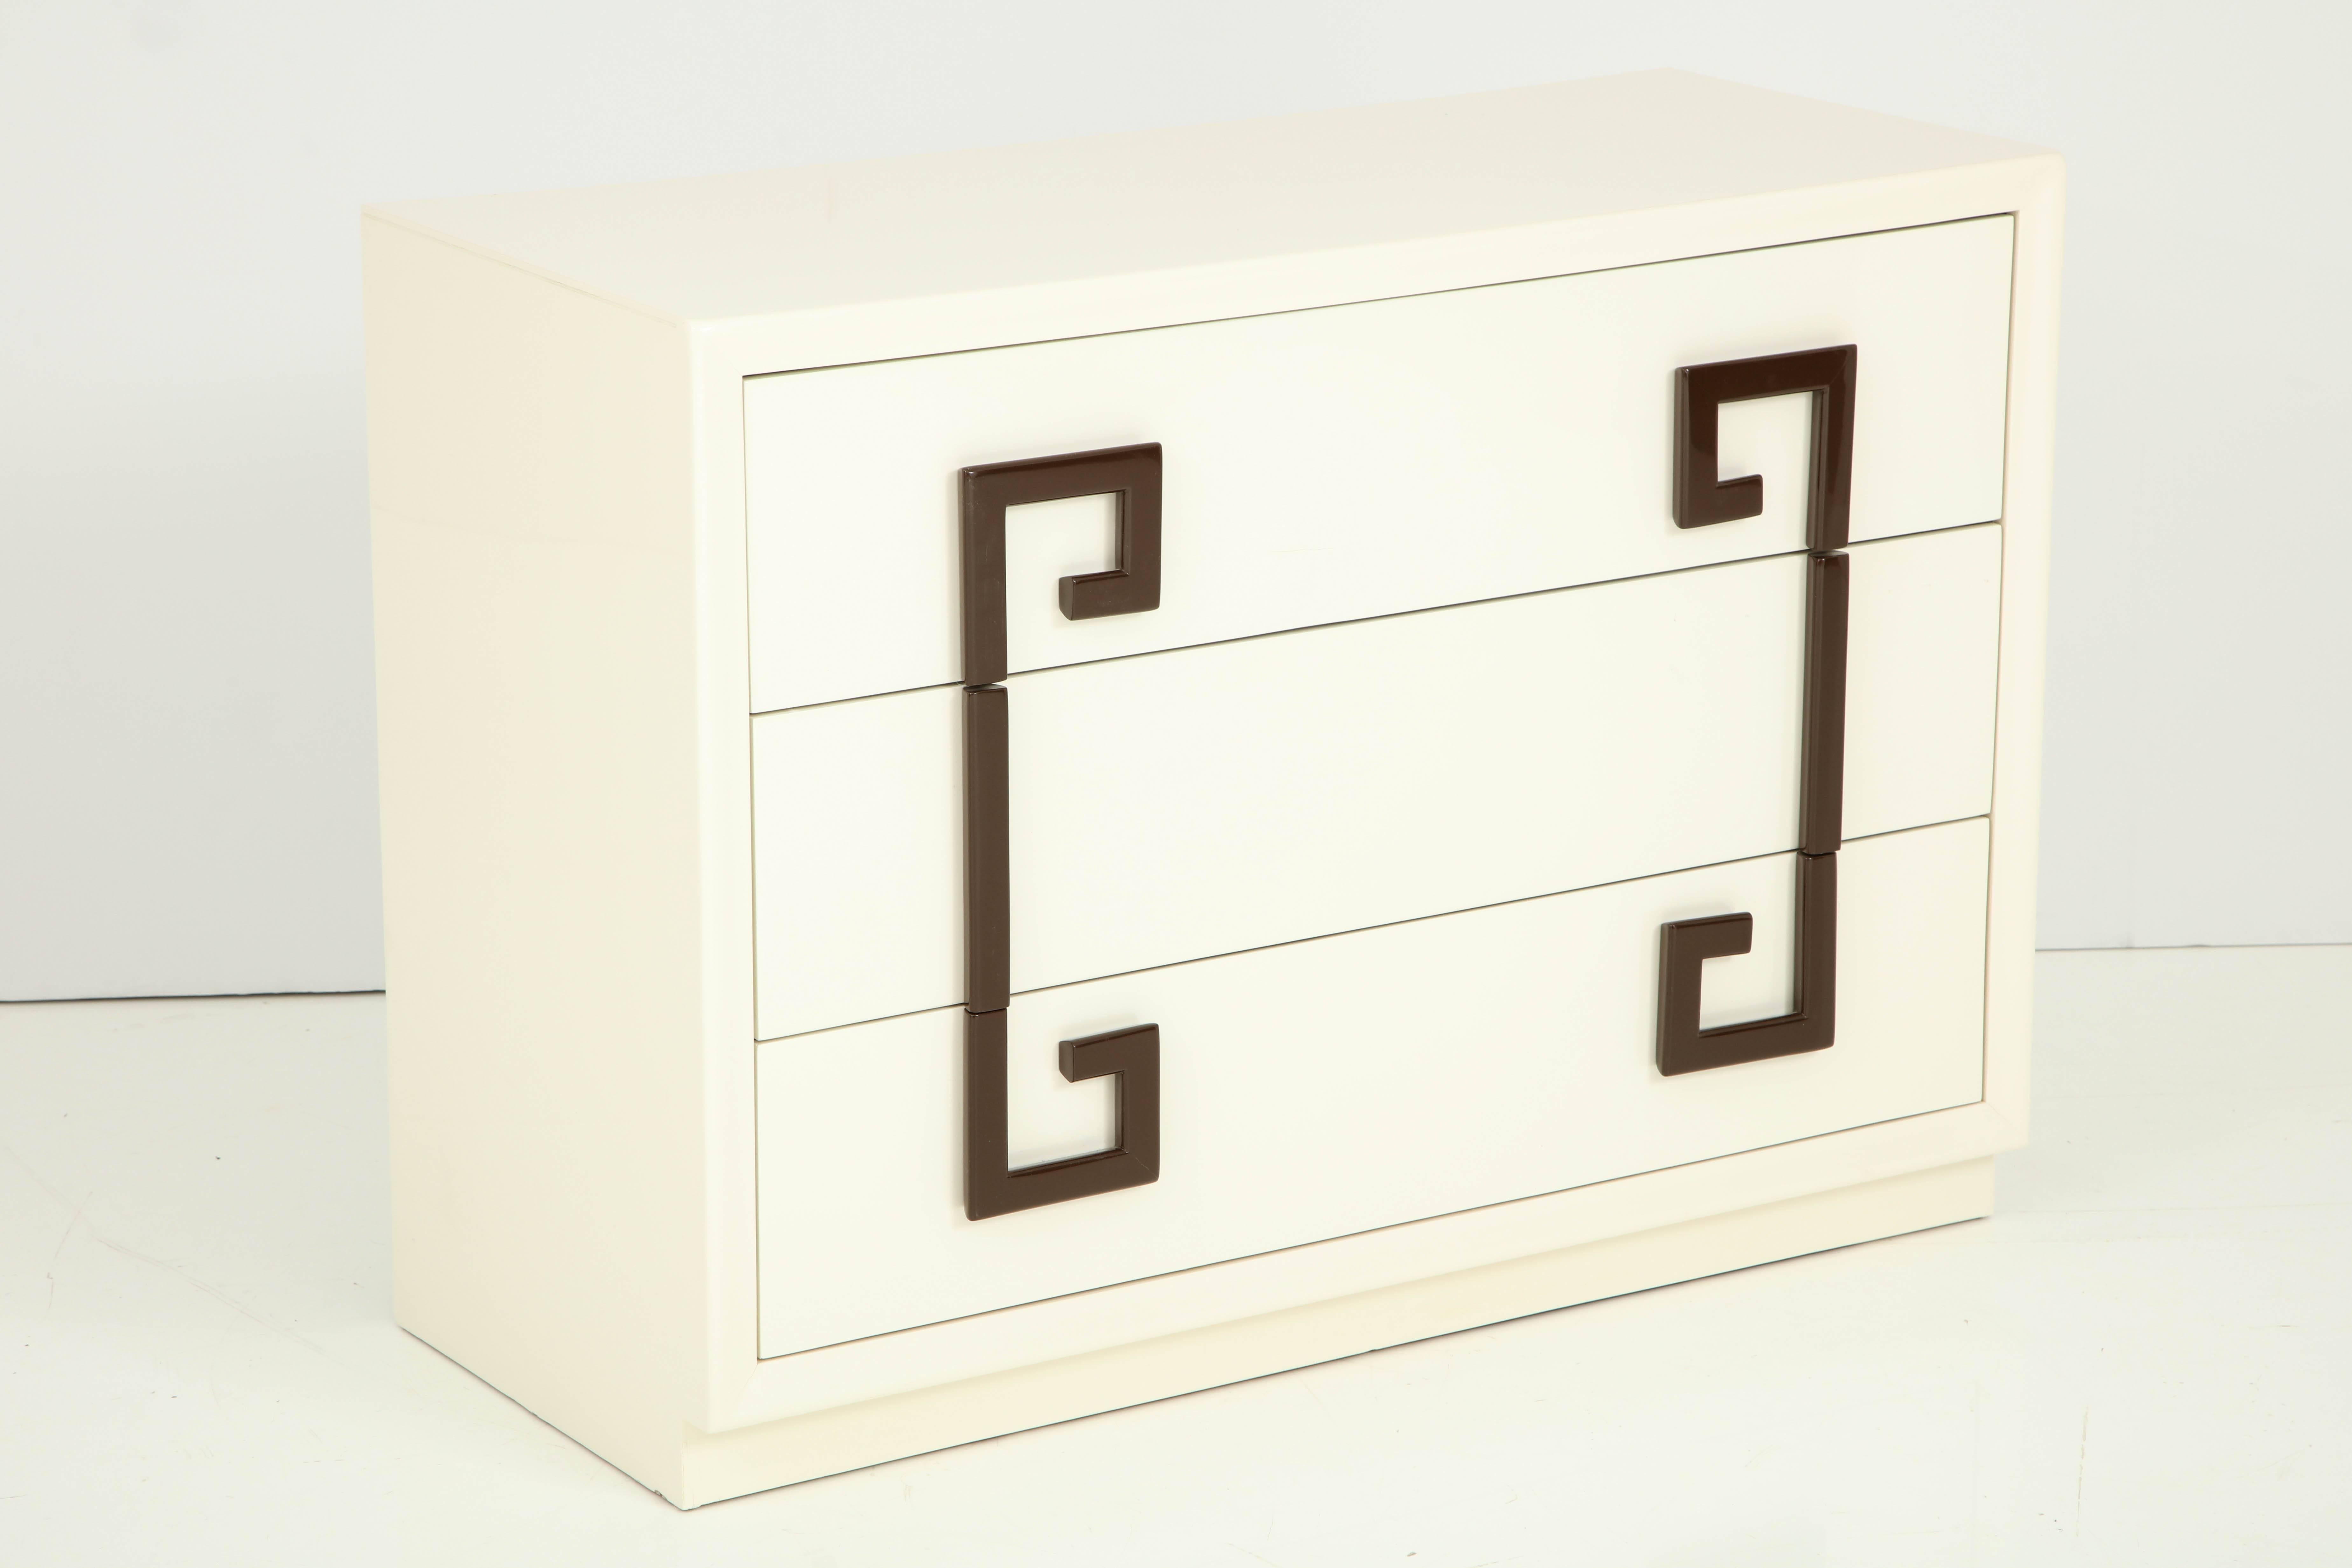 Hollywood Regency chest of drawers in a sophisticated Ivory lacquer with contrasting stylized Greek key pulls in a chocolate brown lacquer, Kittinger c40's. Mint Restored.